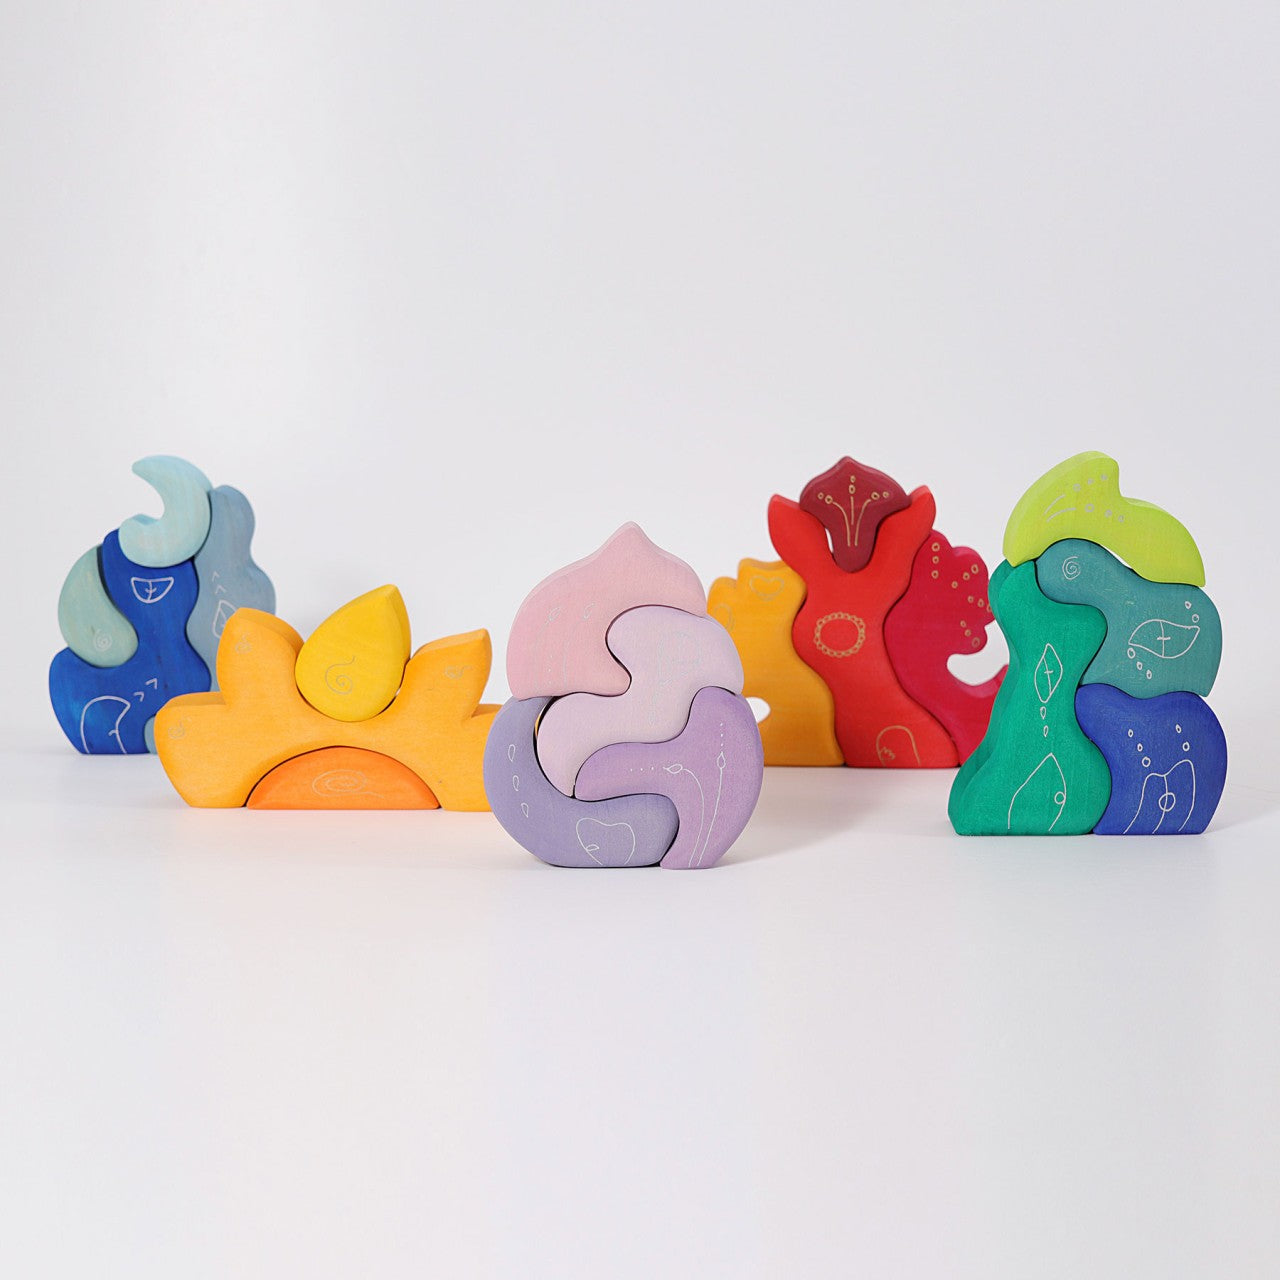 Casa Coral | 4 Pieces | Wooden Toys for Kids | Open-Ended Play